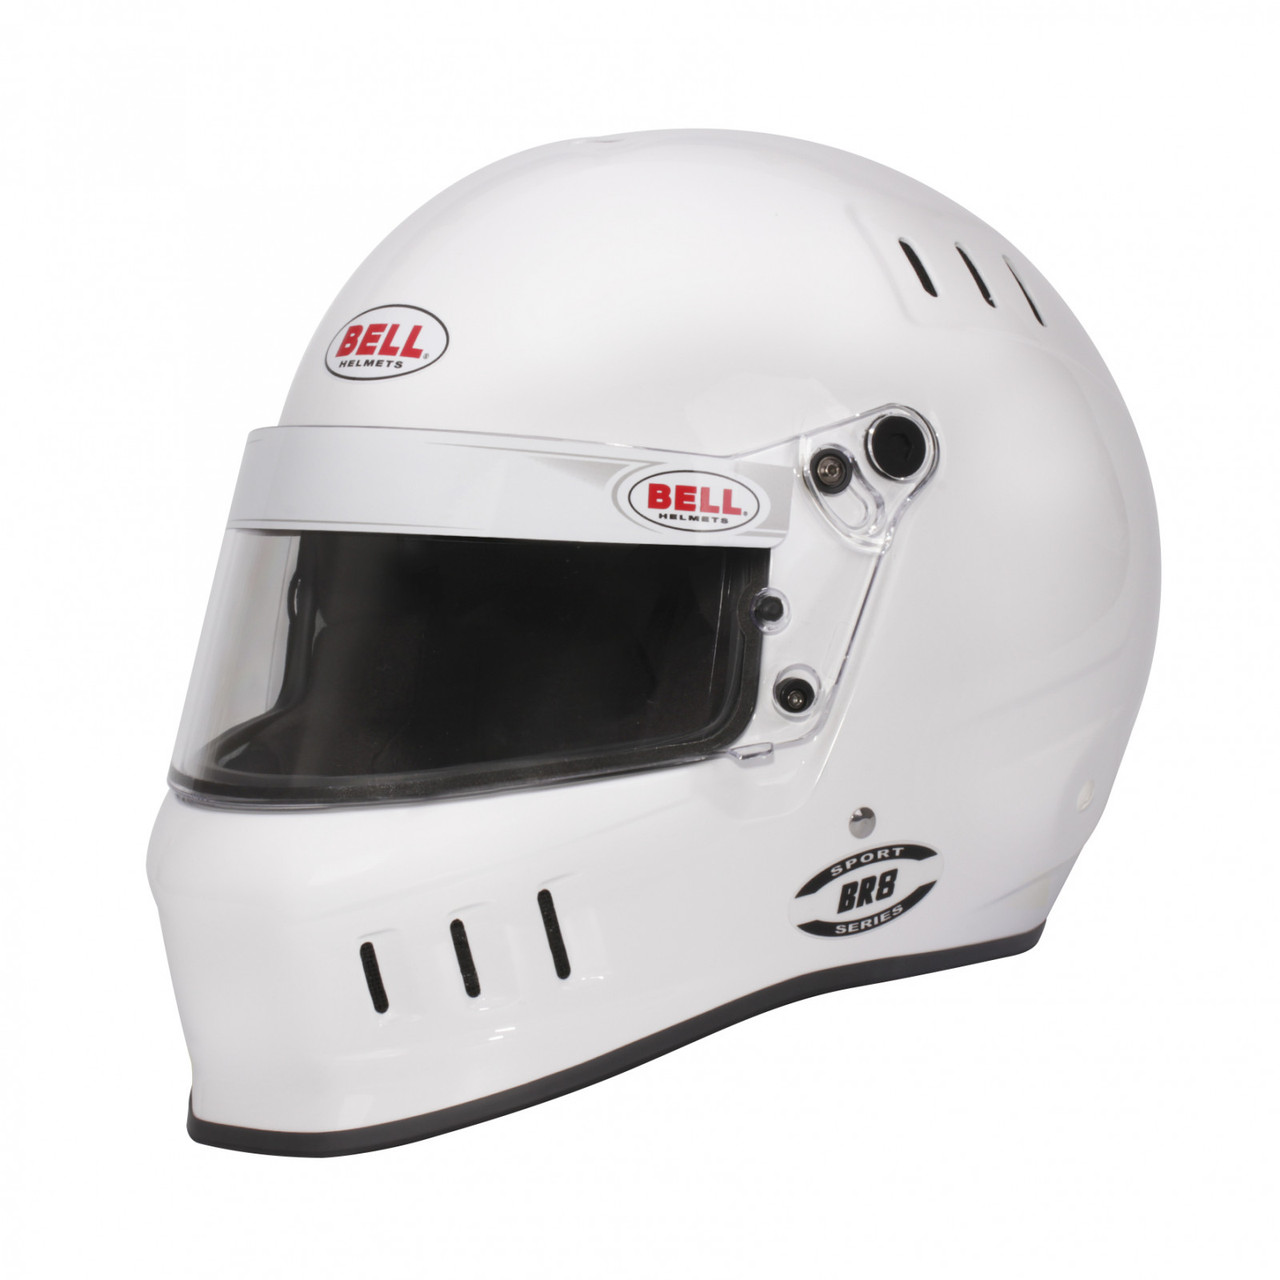 Bell BR8 White Helmet Size Extra Large (BEL-1436A04)